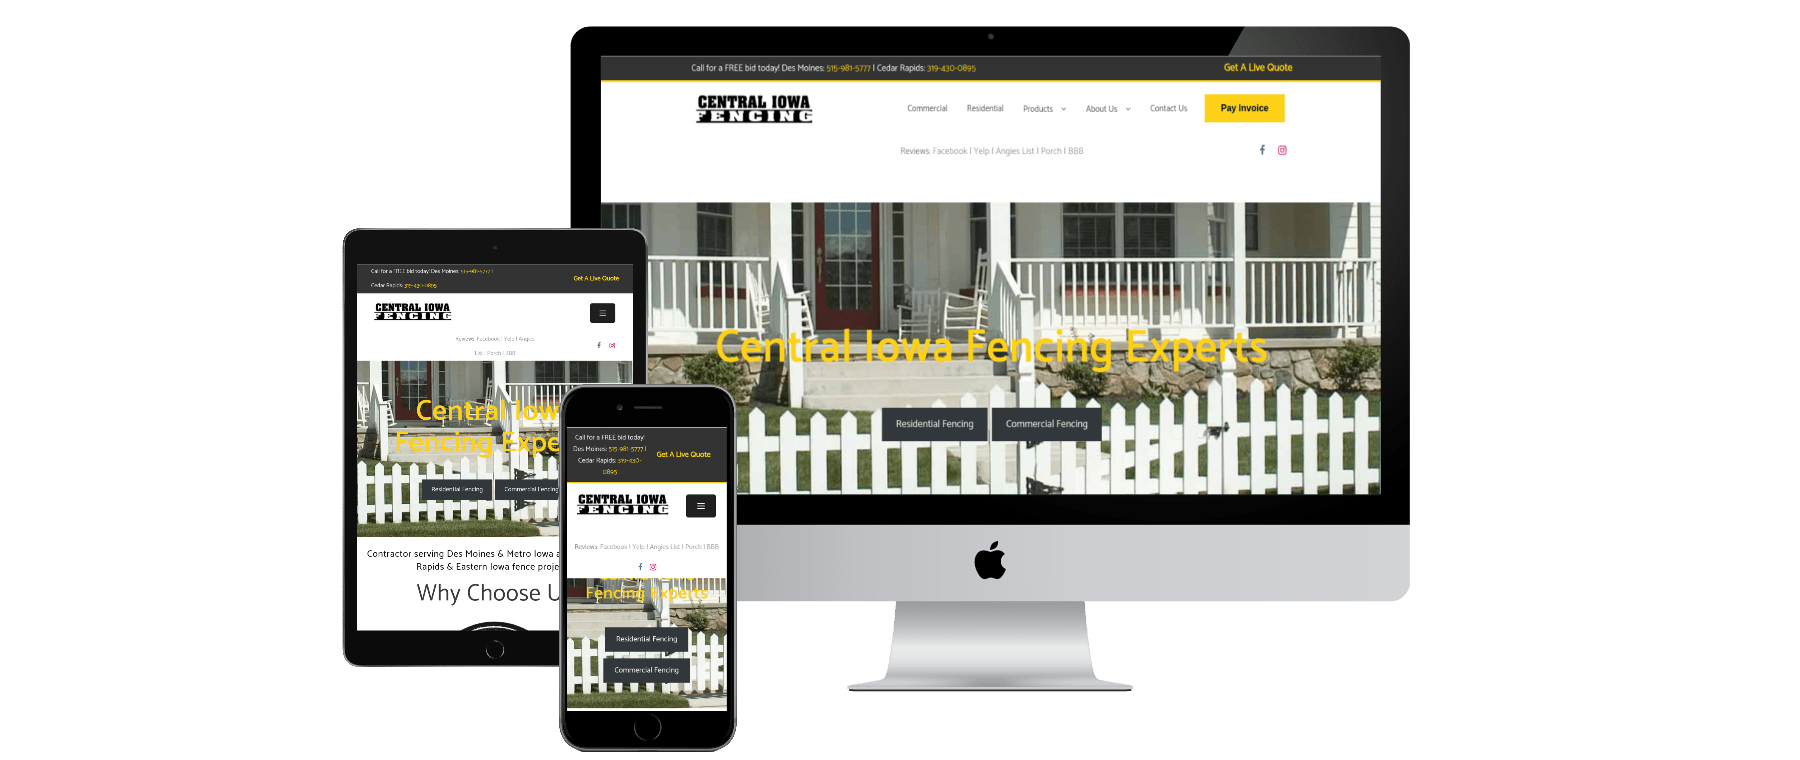 responsive small business web design example